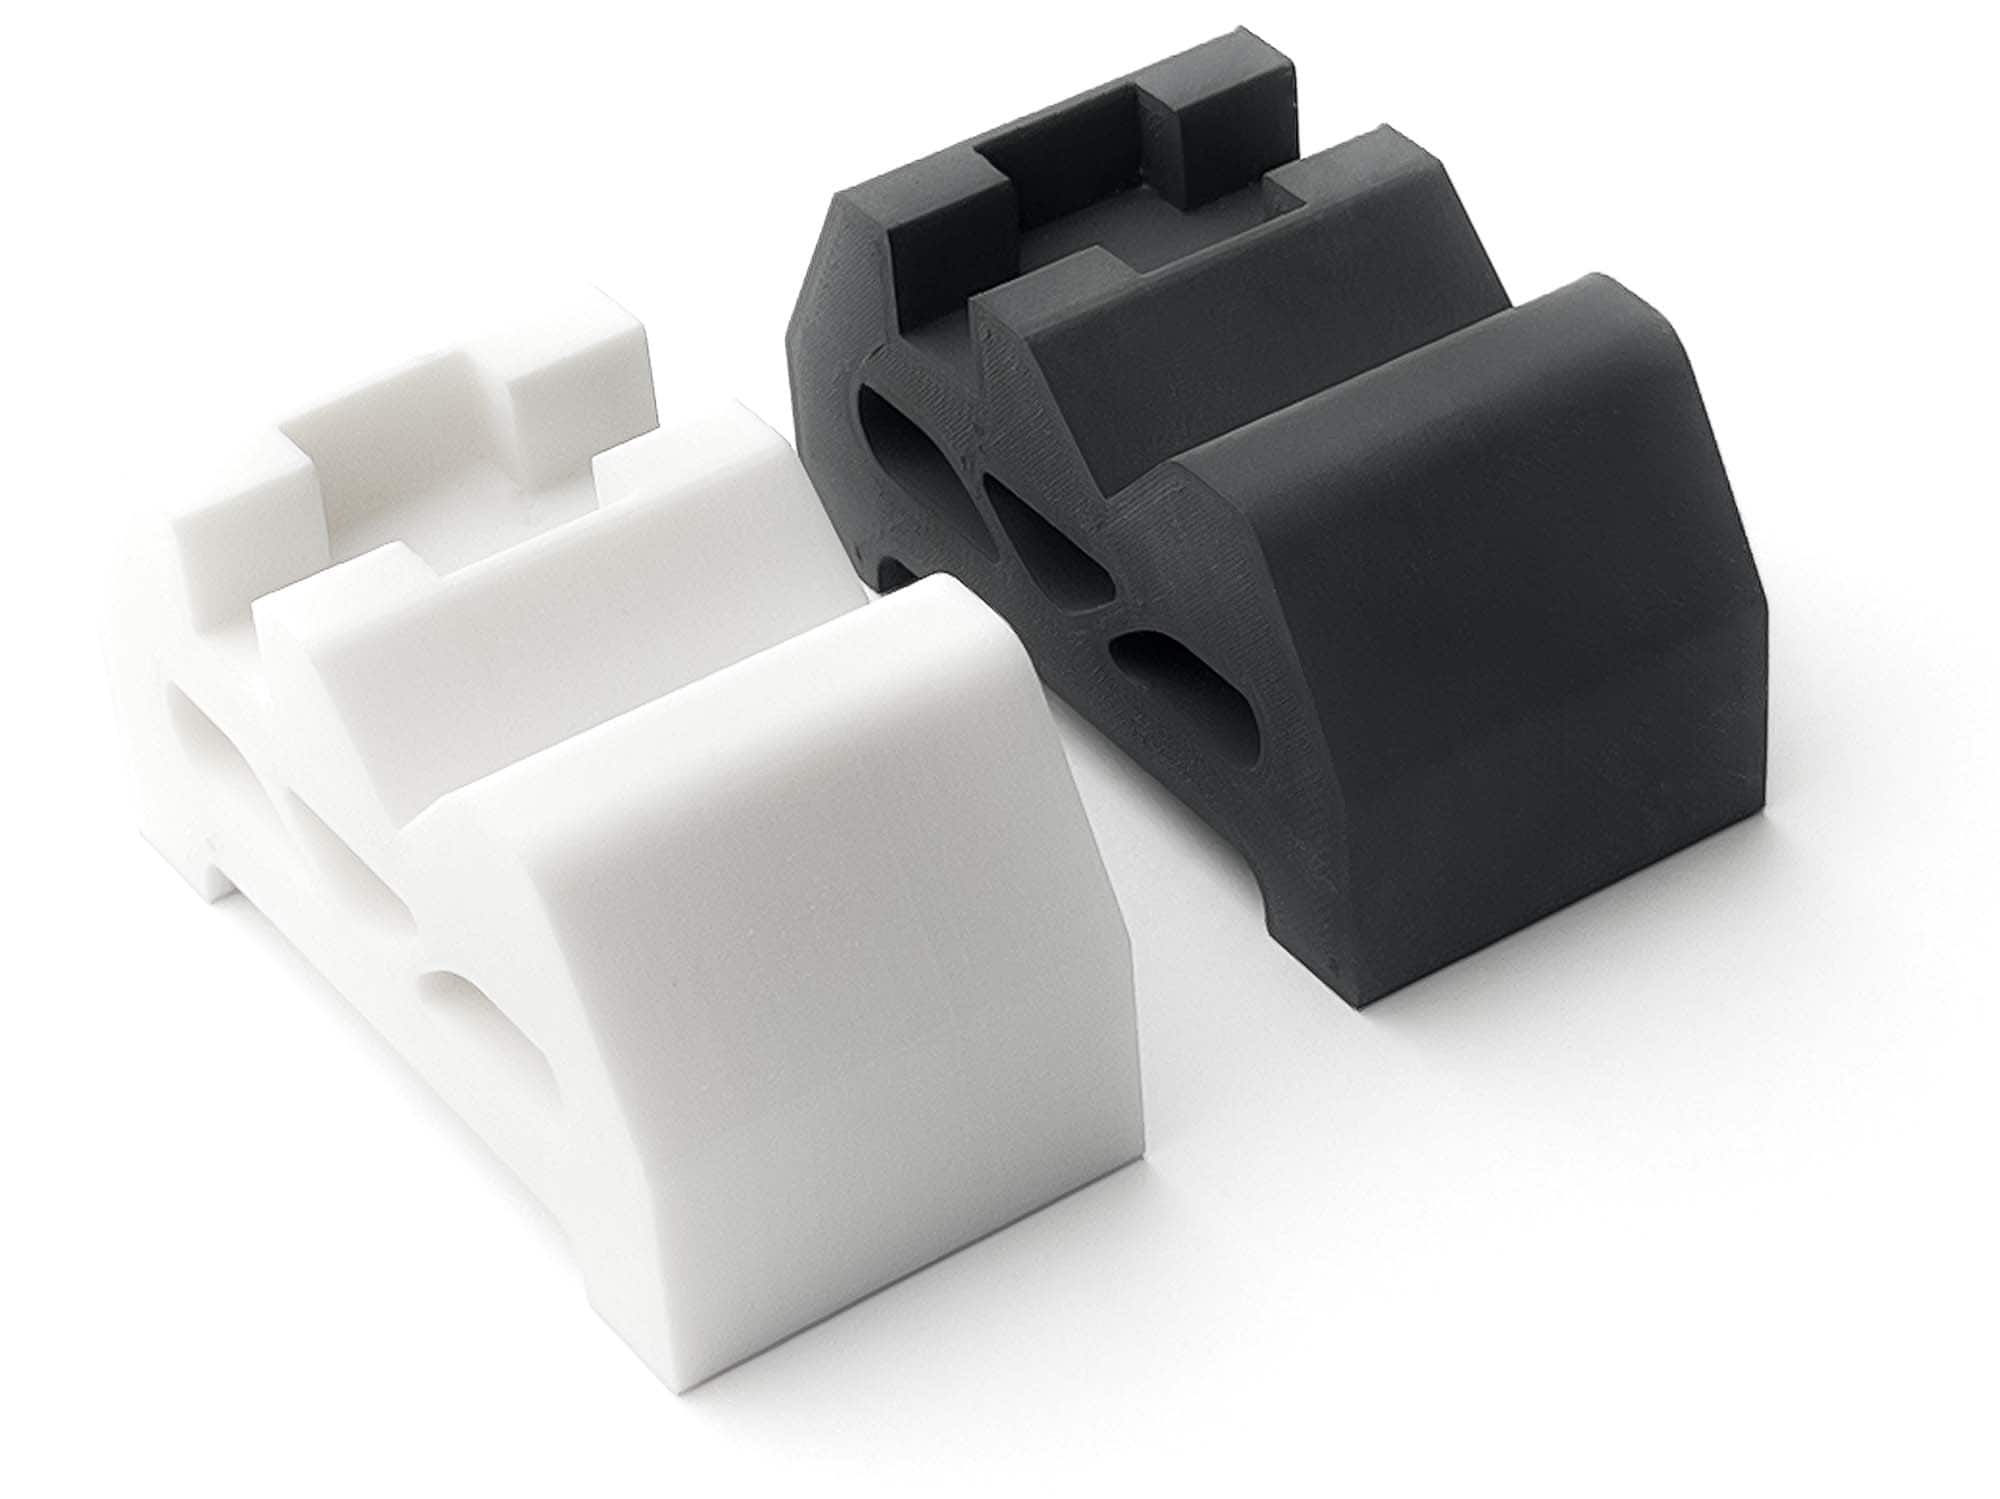 Industrial grade ABS Industrial ABS for 3D printing of durable and  impact-resistant parts